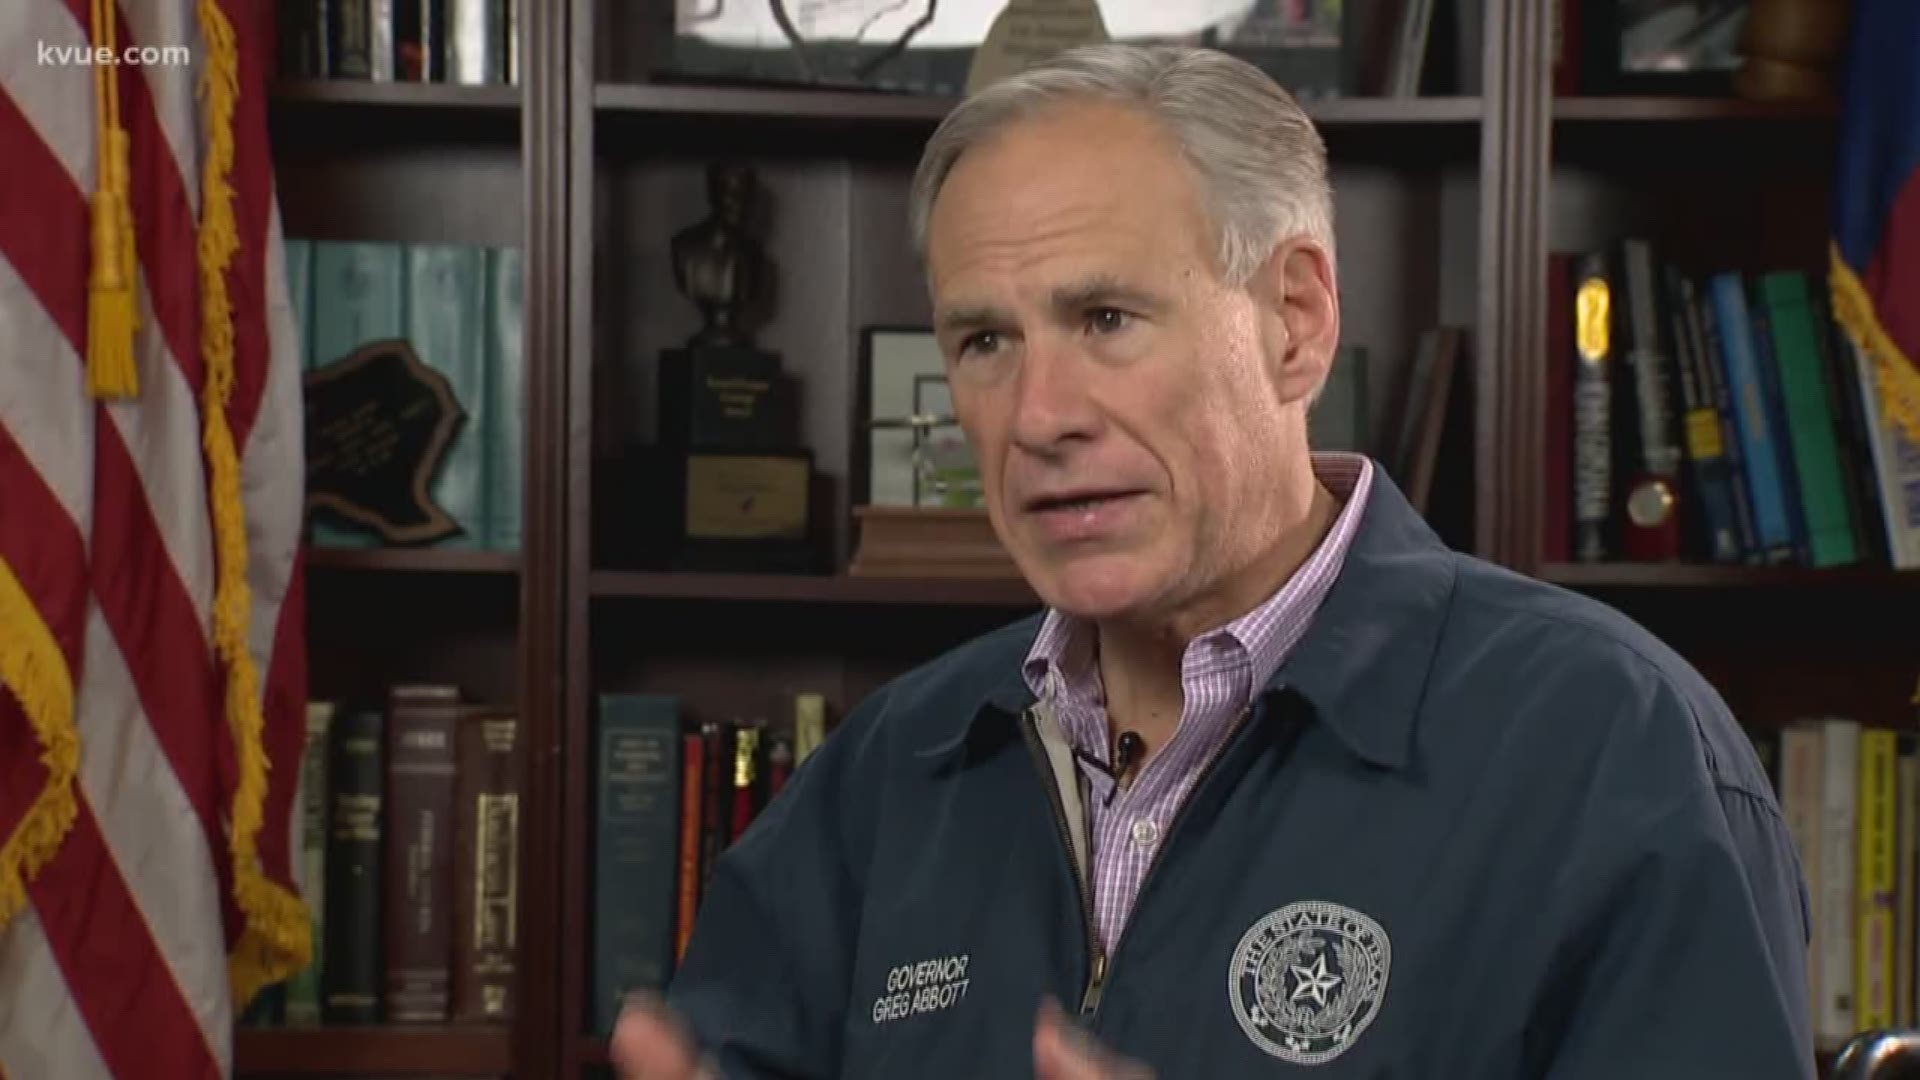 Texas Gov. Greg Abbott said Wednesday morning that he expects the investigation into the Austin bombings to proceed quickly.